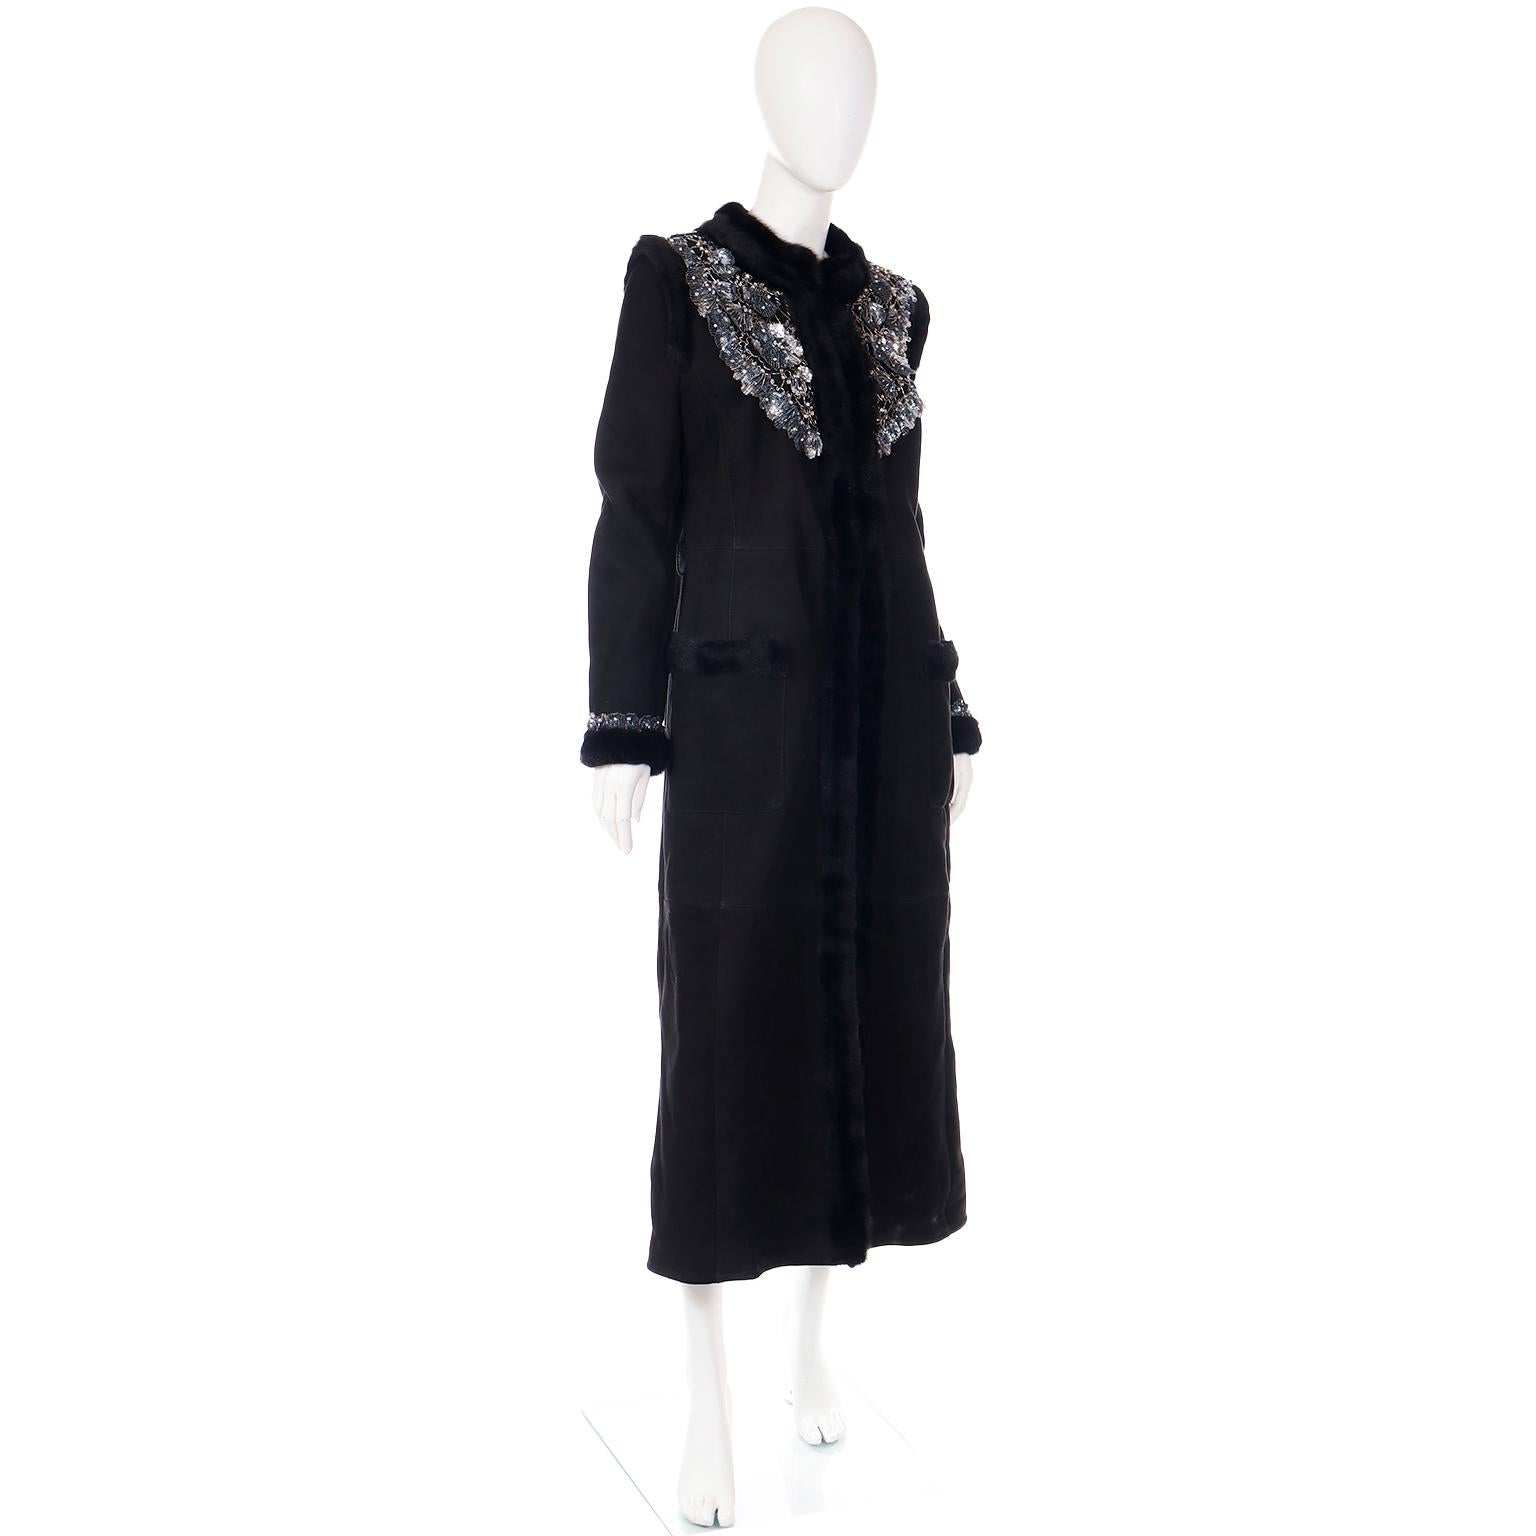 Valentino 2007 Beaded Applique Black Sheepskin Runway Coat w Mink Lining & Trim In Excellent Condition For Sale In Portland, OR